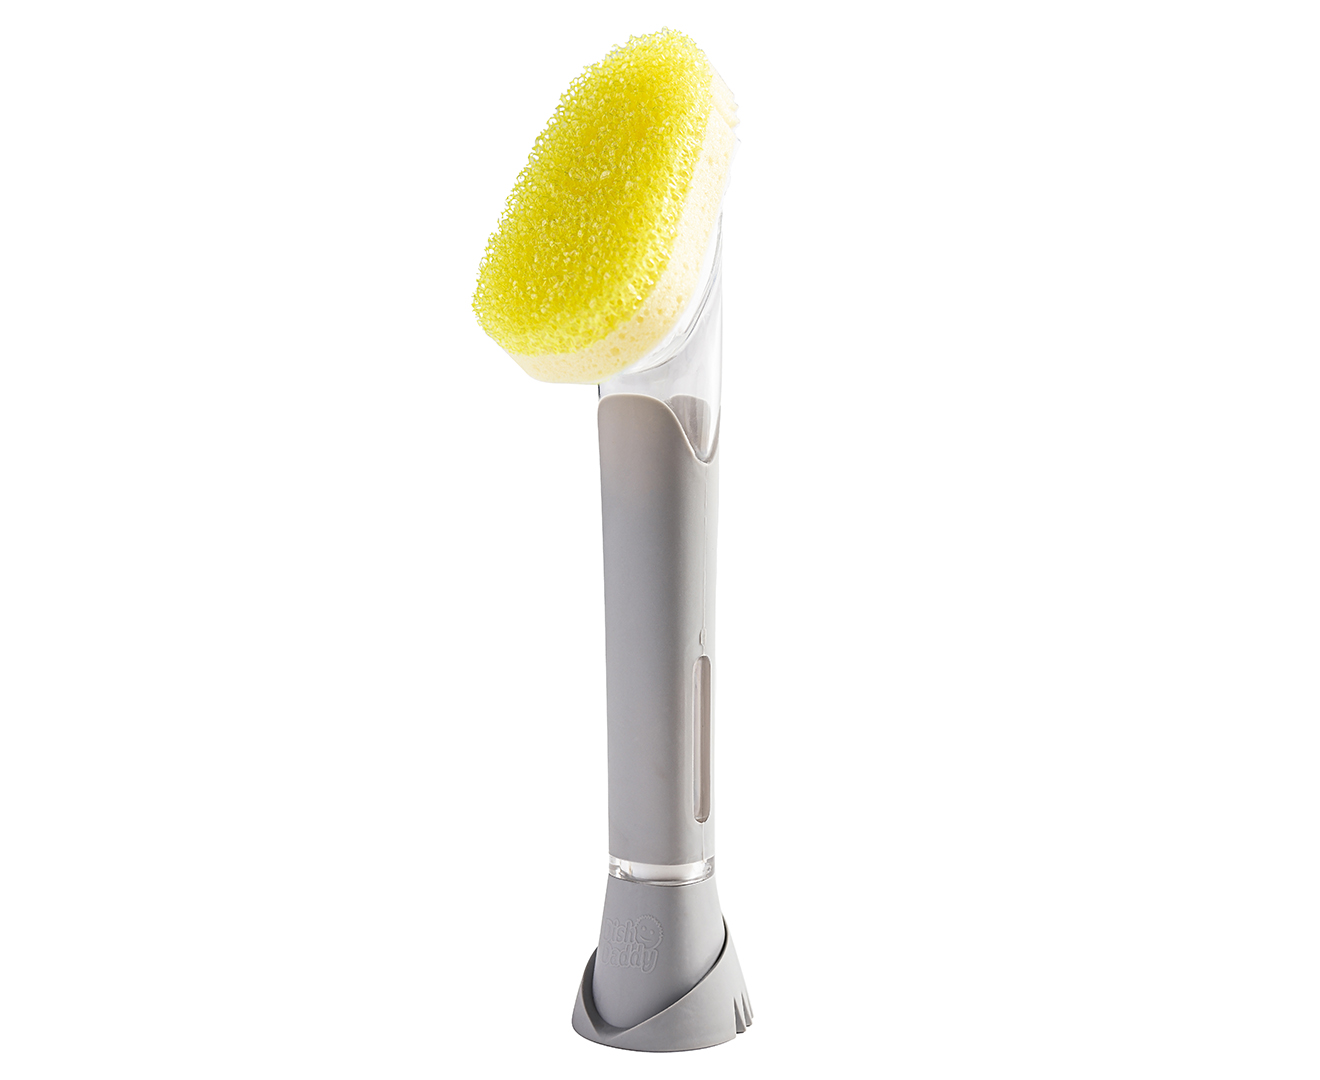 Scrub Daddy Dish Daddy Dish Wand Replacement Head Refill, Compatible with  Soap Dispensing Dish Brush, Texture Changing Washing Up Sponge With Liquid  Handle and Built-in Scraper - x2 Refill Heads: Buy Online